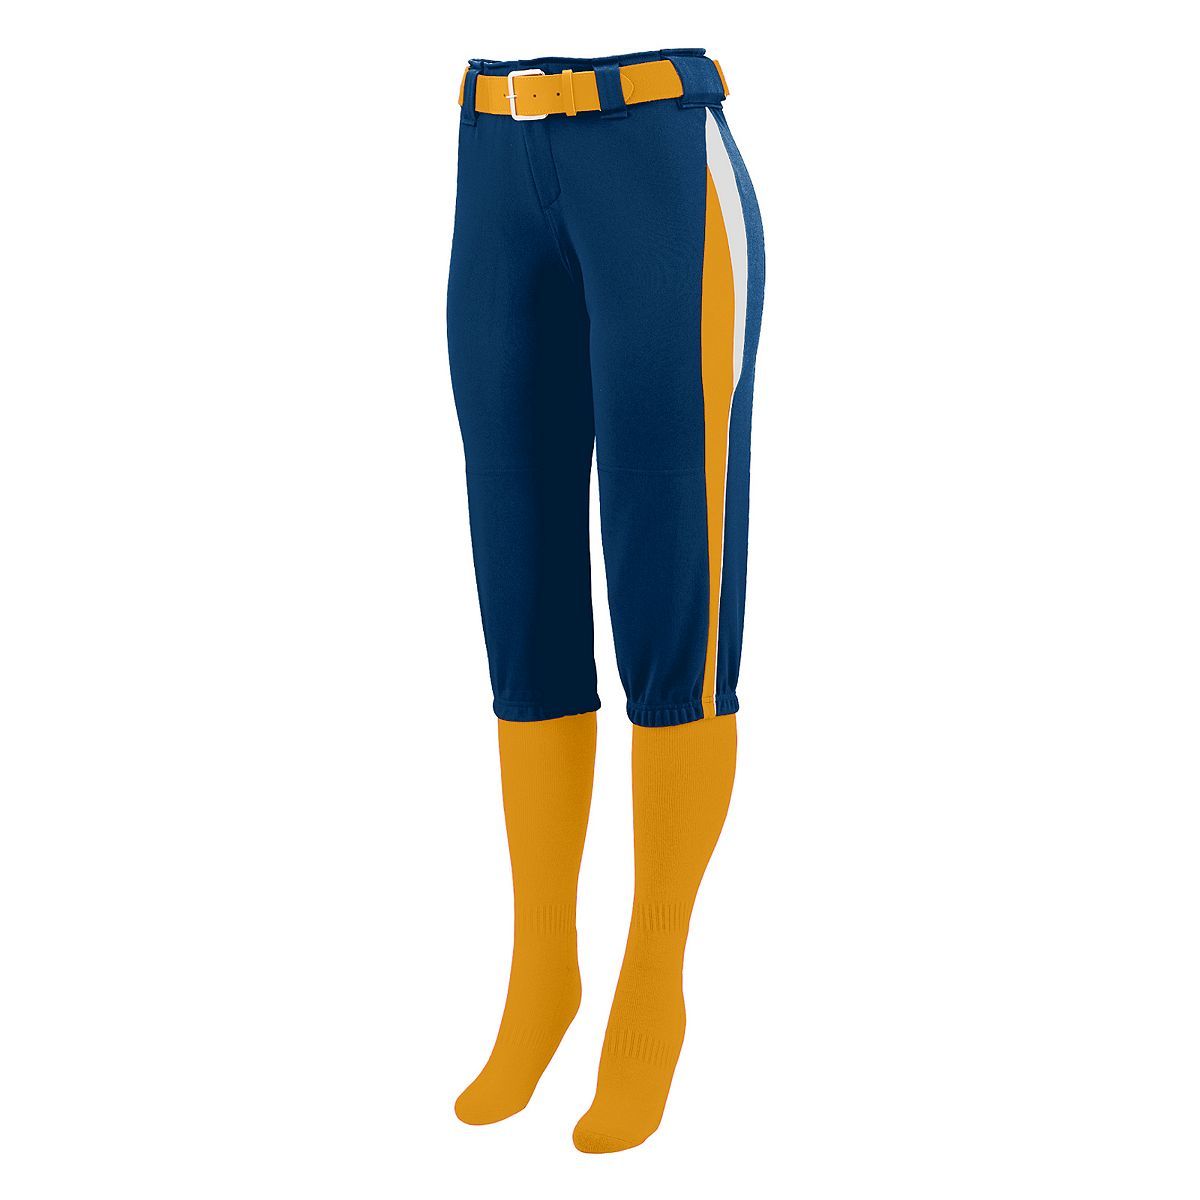 Augusta Sportswear Ladies Comet Pant in Navy/Gold/White  -Part of the Ladies, Ladies-Pants, Pants, Augusta-Products, Softball product lines at KanaleyCreations.com